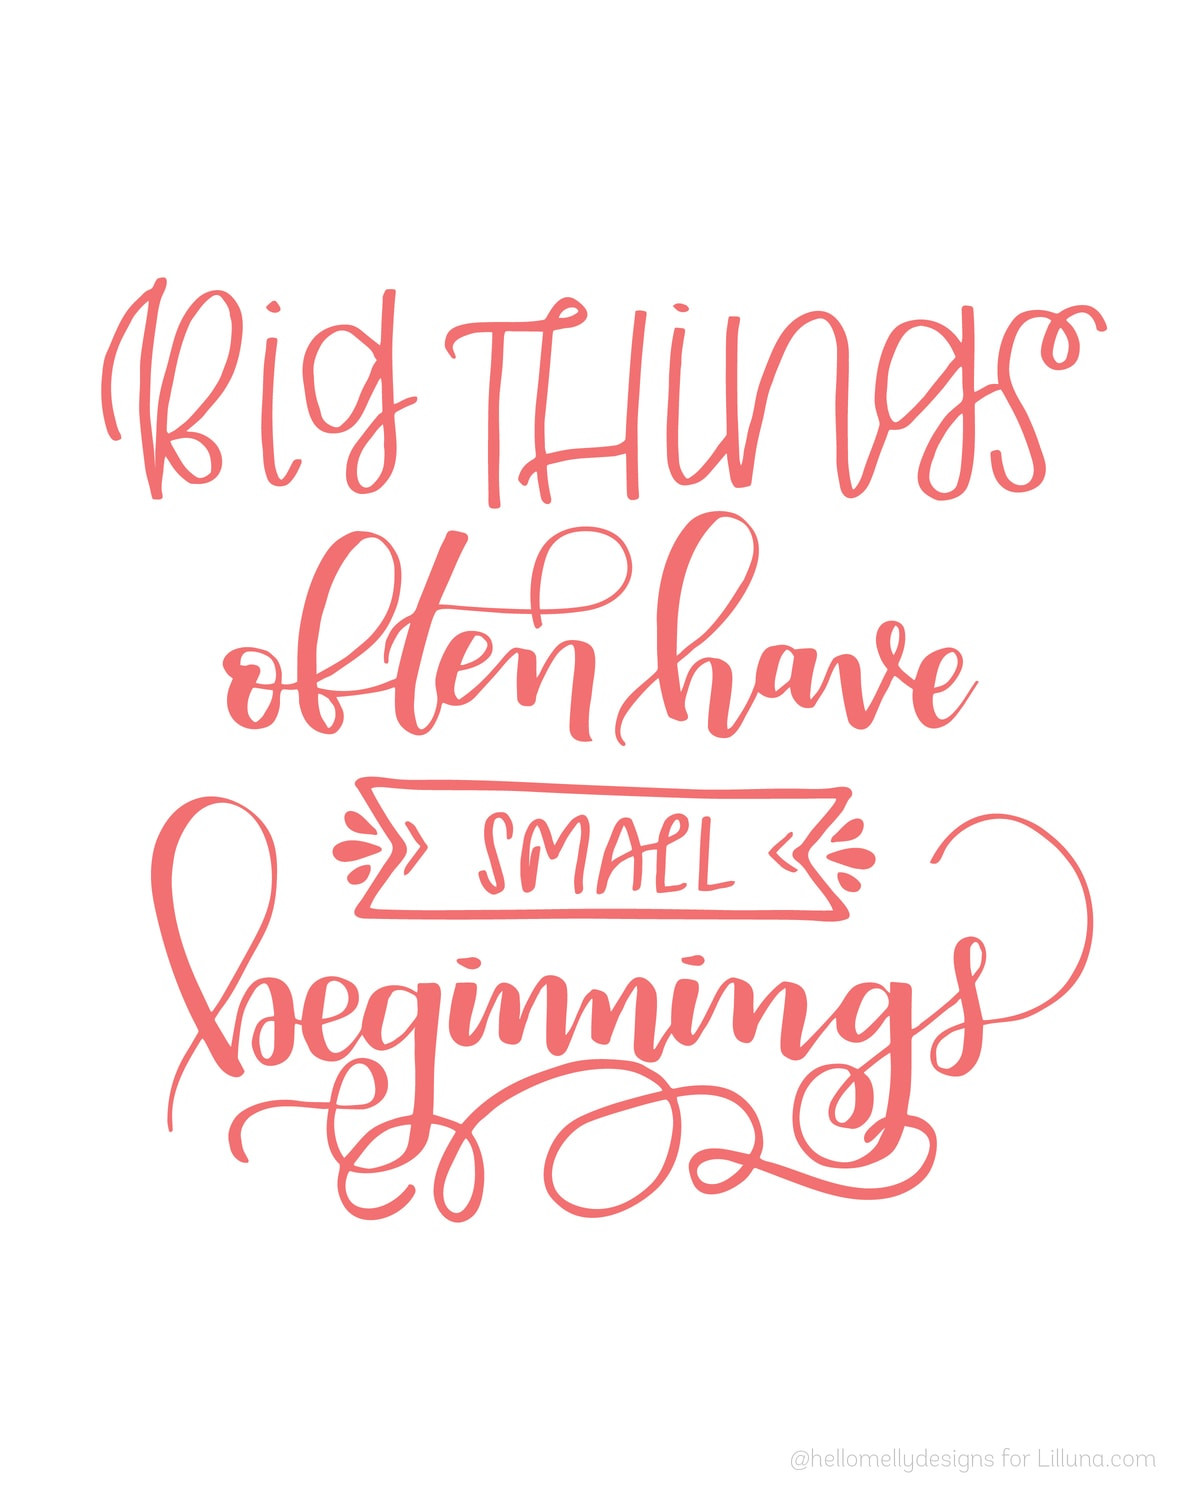 Small Positive Quotes
 Big Things ten Have Small Beginnings Lil Luna